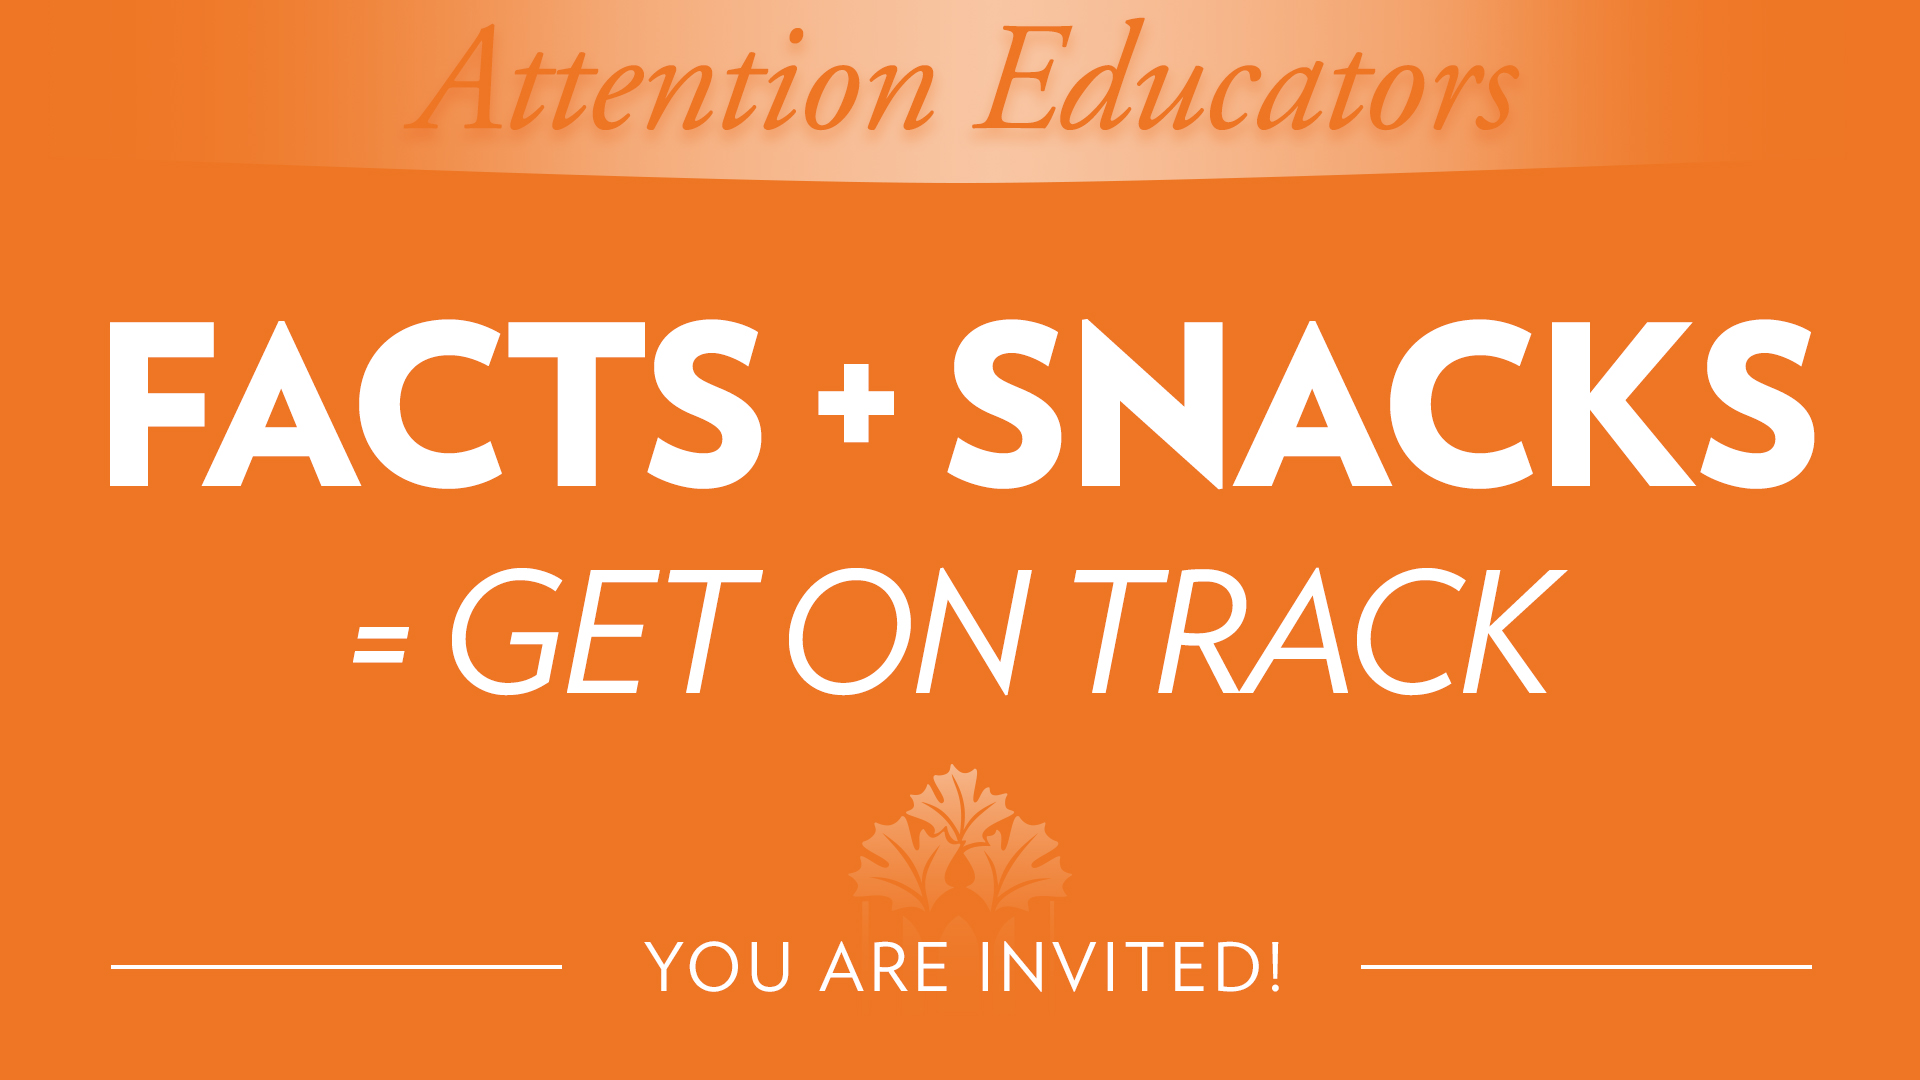 Facts + Snacks = Get on track graphic